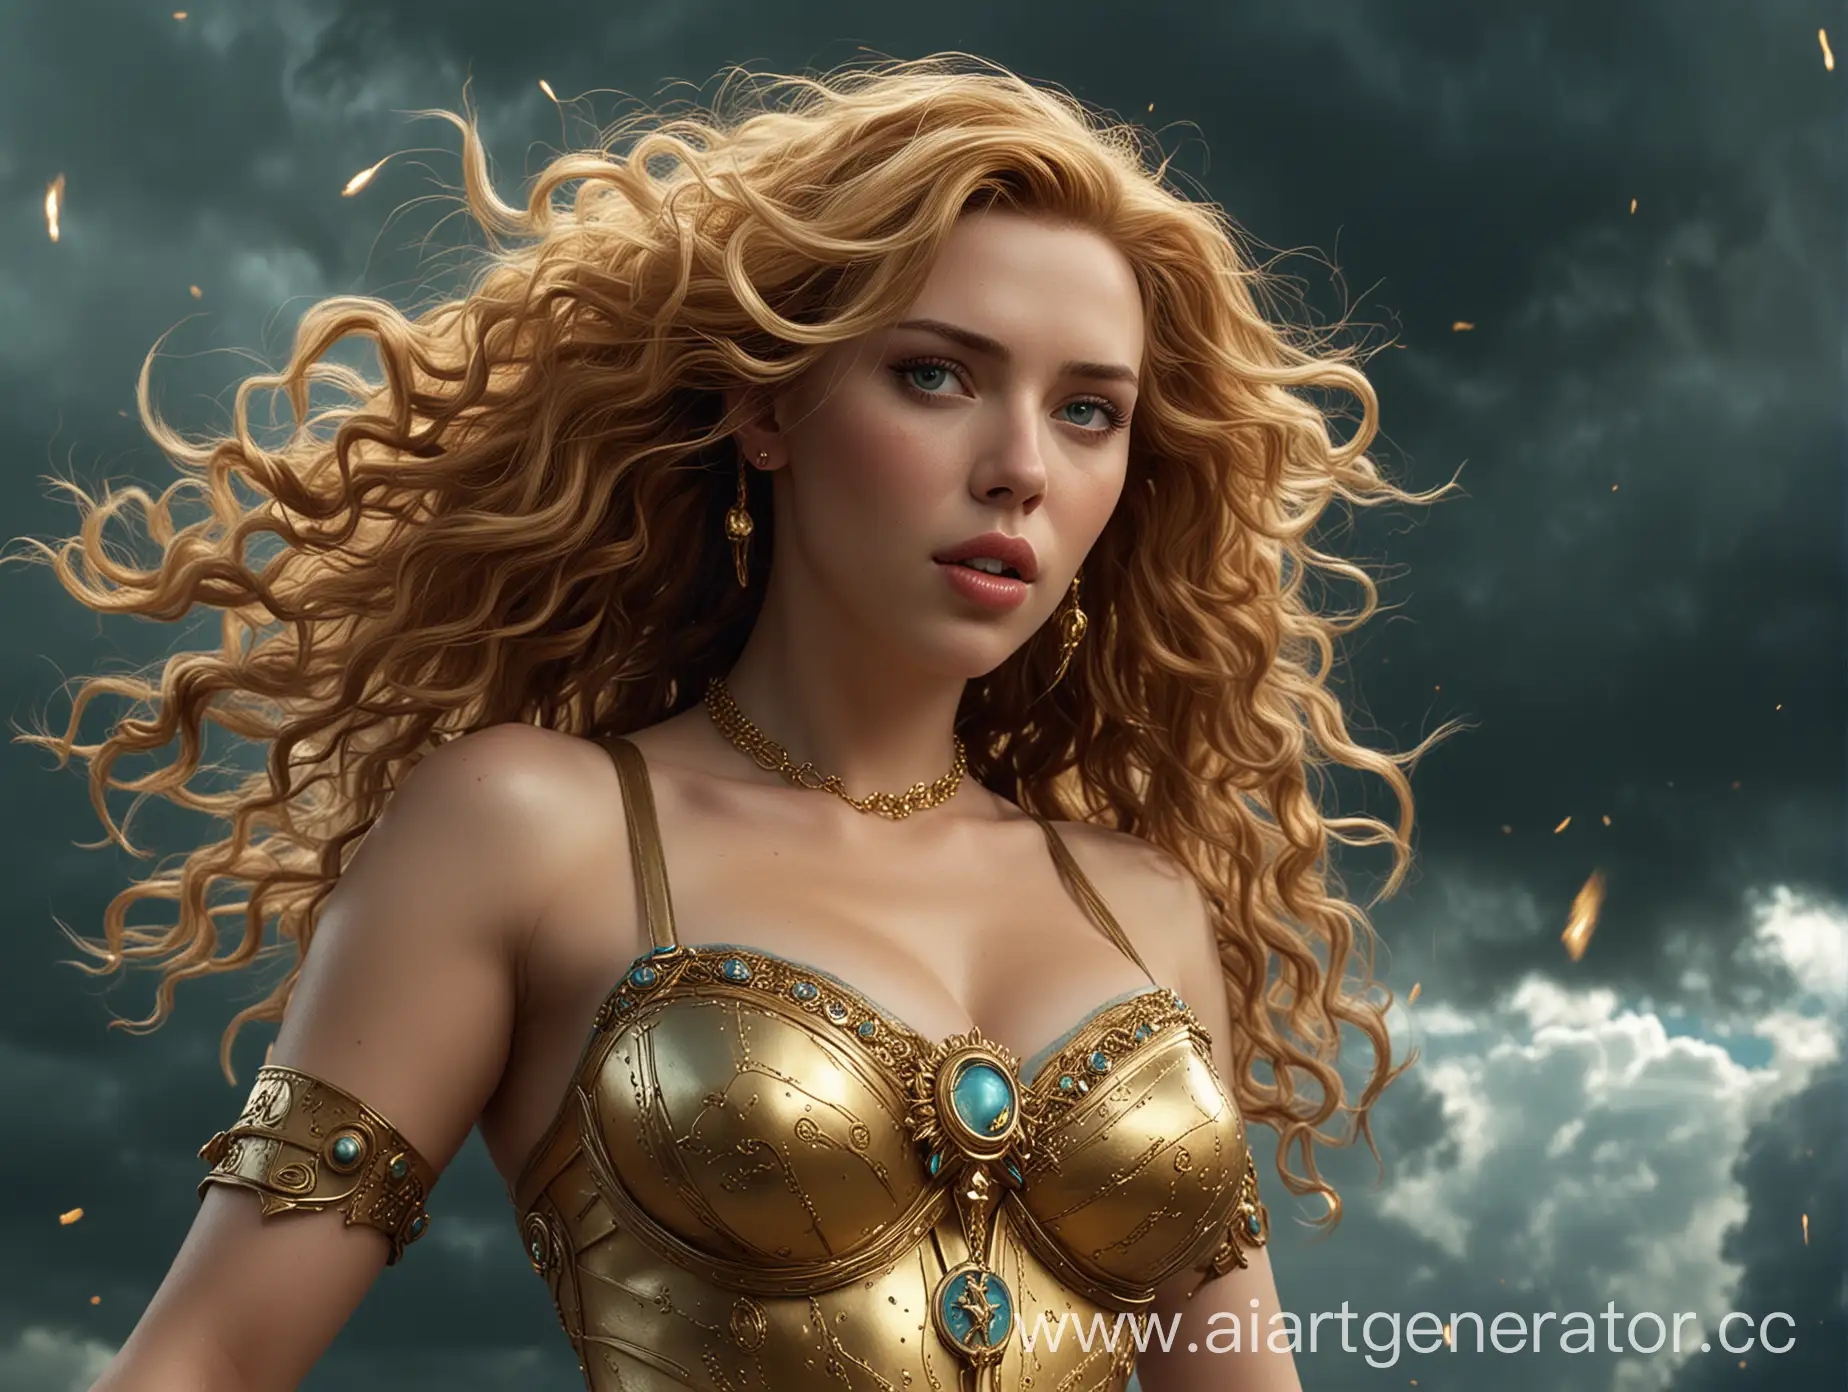 Scarlett Johansson with fair white skin, has a magnificent G-cup figure, a beautiful perfect face, an hourglass figure, long curly turquoise hair, blue eyes, completely dressed in gold and gold accessories, as well as the symbol of Neptune. She soars in the sky against a background of golden lightning and dark clouds, depicted with high detail and realism using photorealistic digital painting. The image is cinematic, stunning, hyper-realistic, with clear focus and a high resolution of 8k, showing an incredible level of detail.